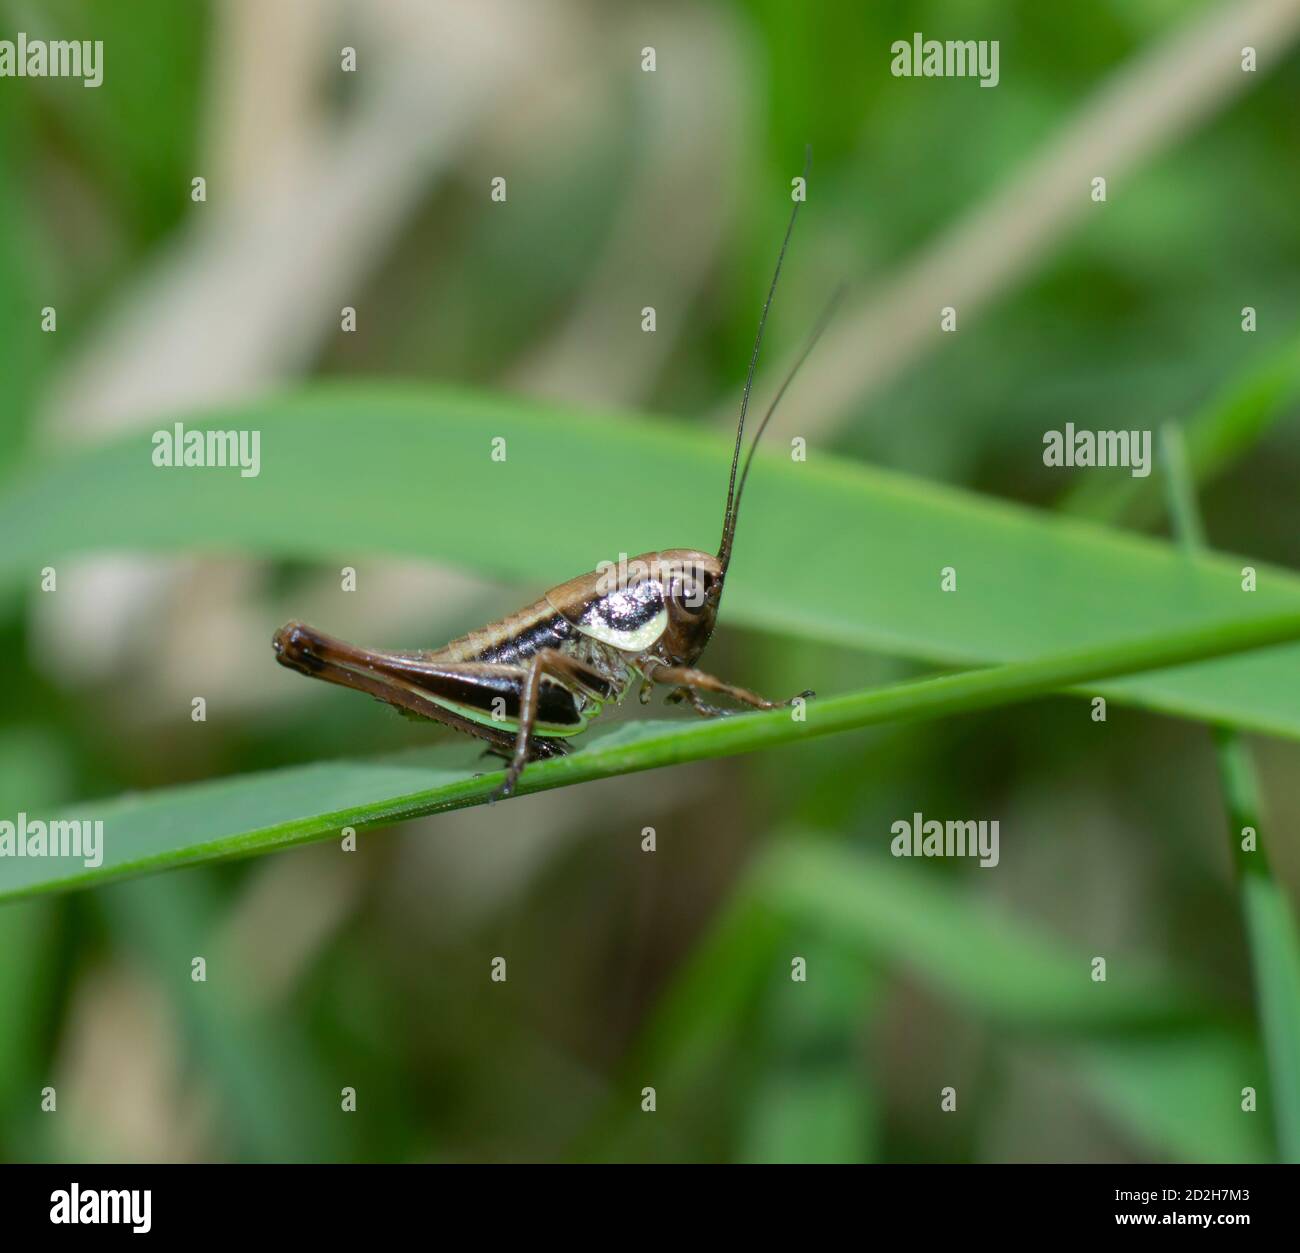 Close-up of a small cricket on a blade of grass Stock Photo